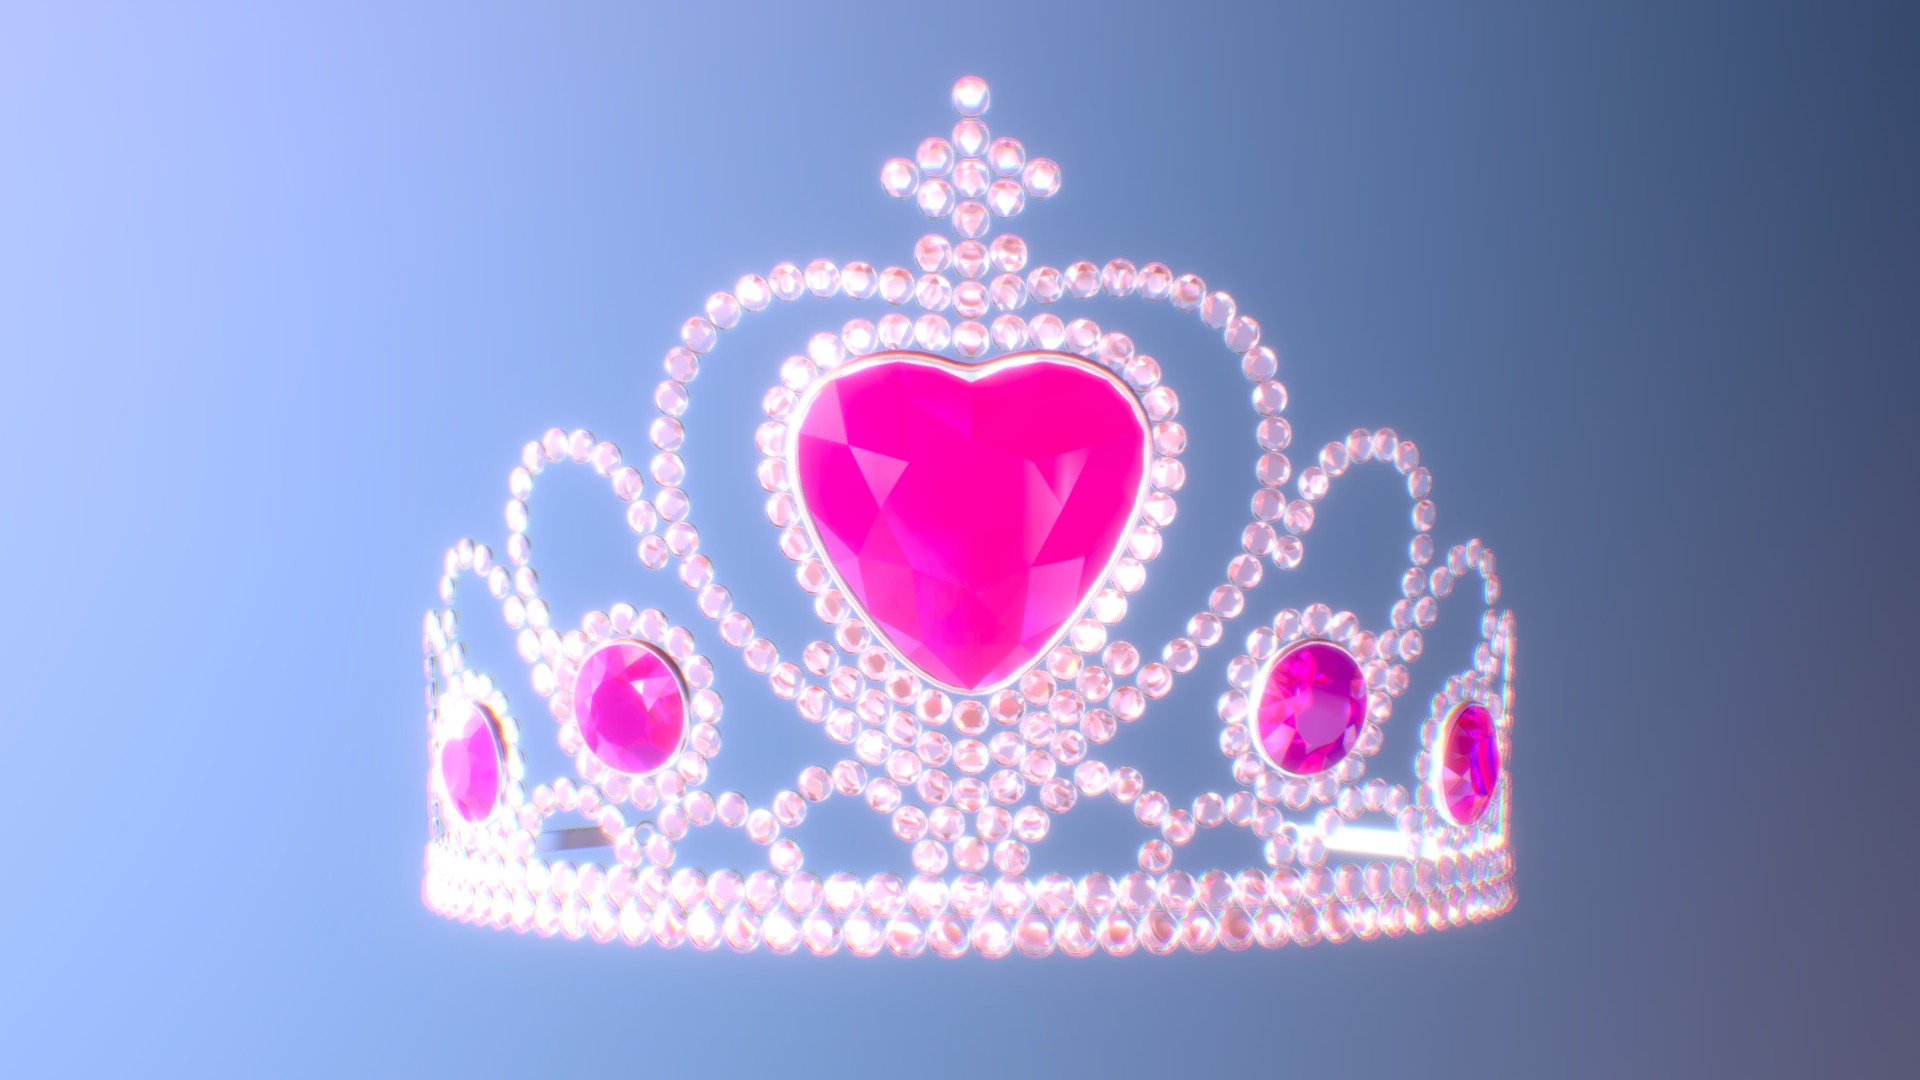 3D model Tiara - This is a 3D model of the Tiara. The 3D model is about a heart made of small pink and white beads.